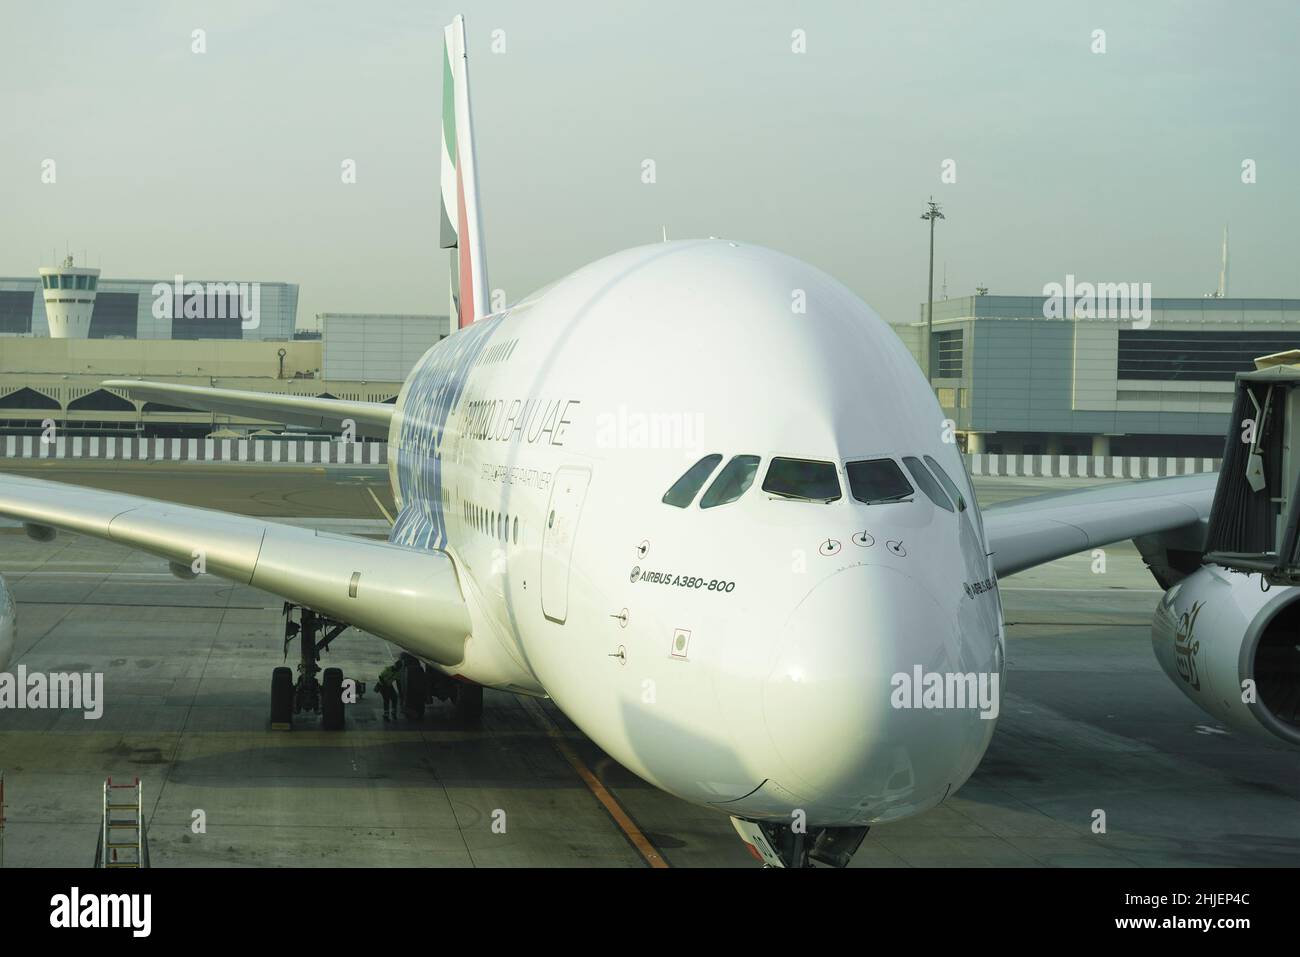 DUBAI, UAE - FEBRUARY 02, 2020: Airbus A380-800 close-up in the early morning. Front view. Dubai International Airport Stock Photo